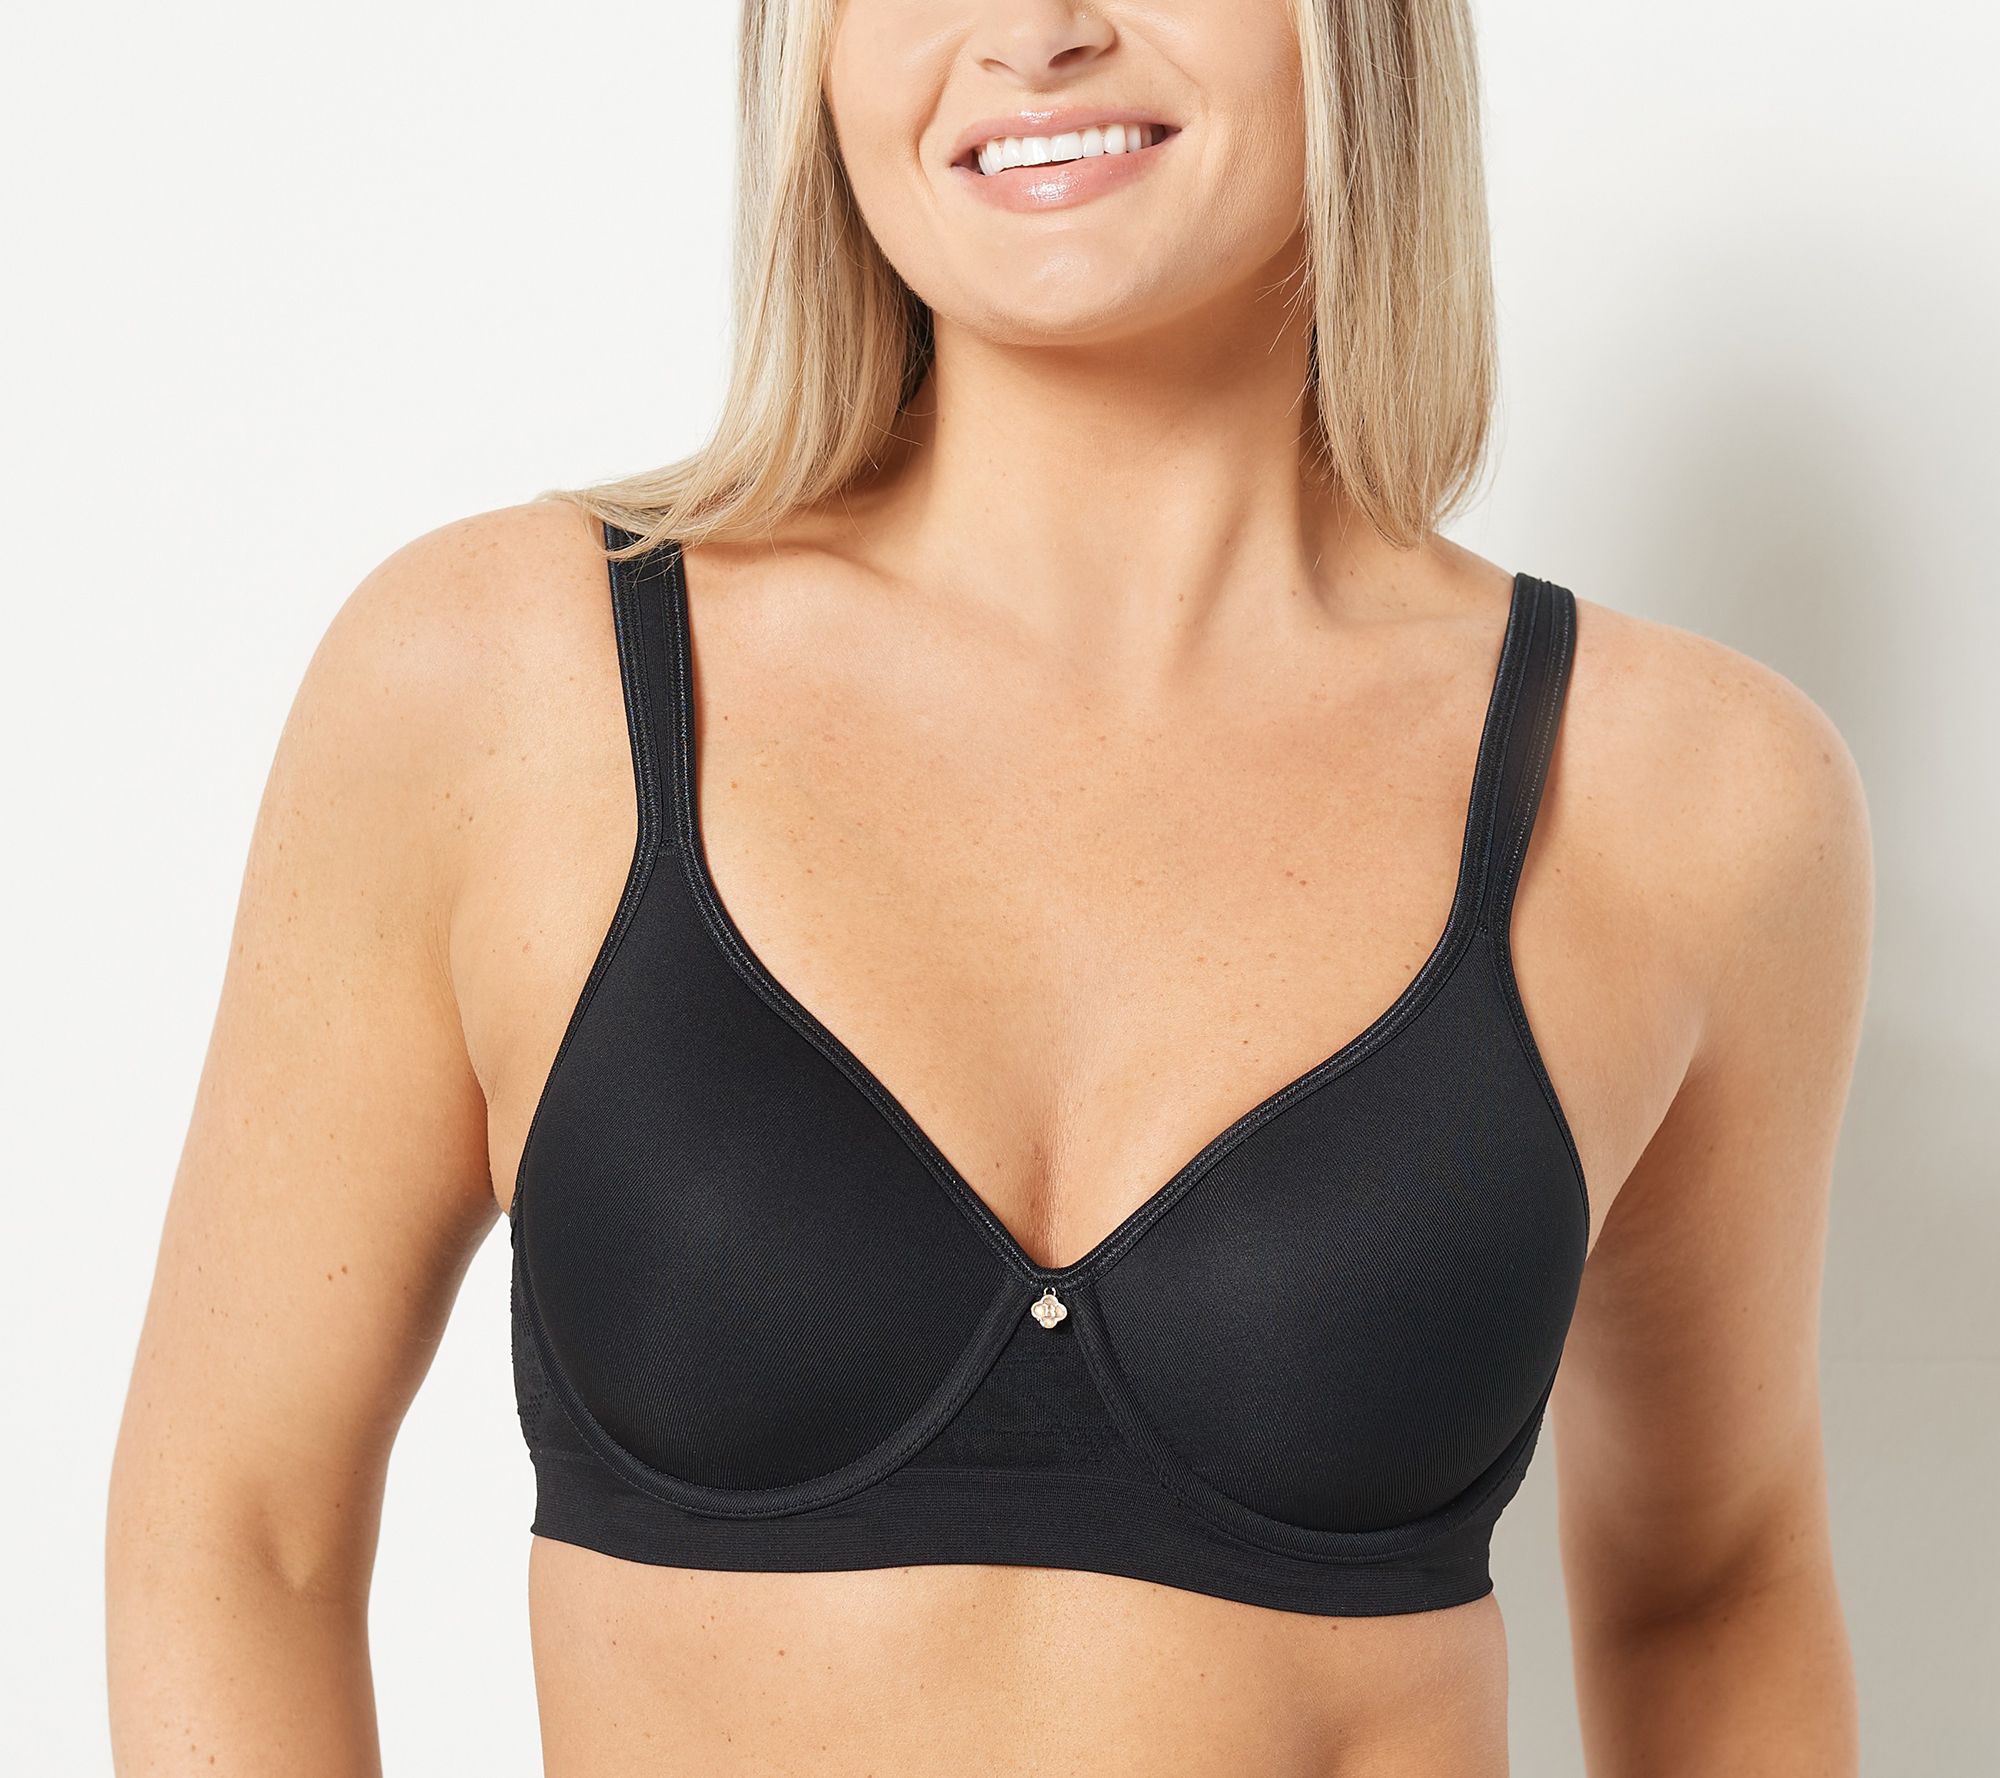 BREEZIES SOFT SHIMMER Seamless Front Close Wirefree Bra Black 36 C A294541  QVC J $24.98 - PicClick